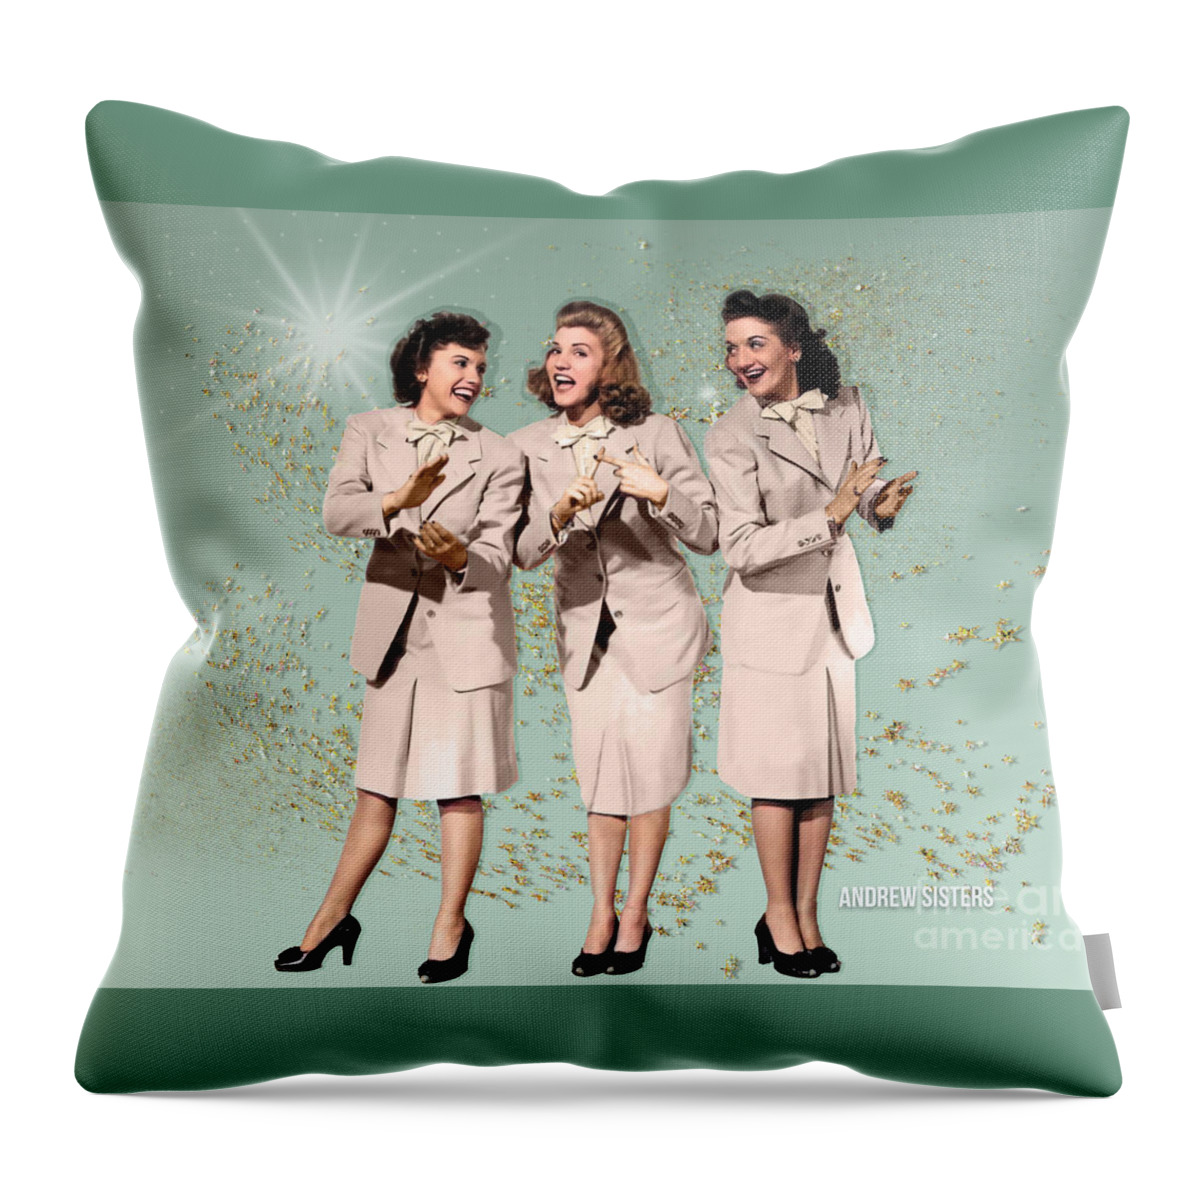 Andrews Sisters Throw Pillow featuring the photograph Andrew Sisters by Carlos Diaz